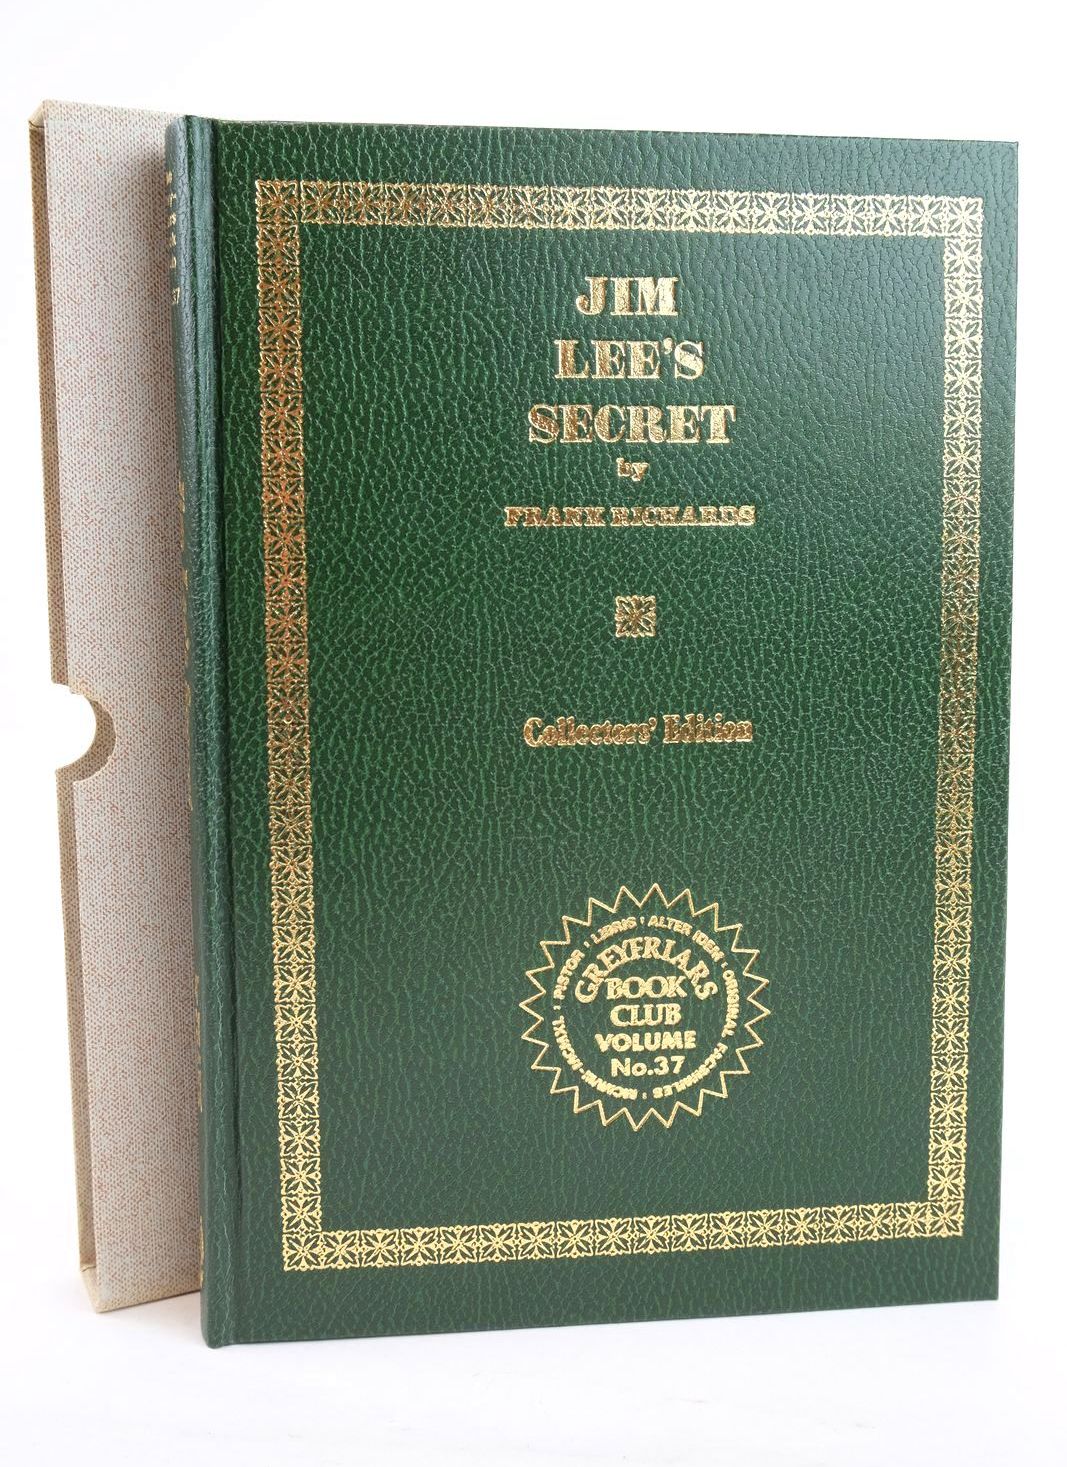 Photo of JIM LEE'S SECRET written by Richards, Frank published by Howard Baker Press (STOCK CODE: 1319792)  for sale by Stella & Rose's Books